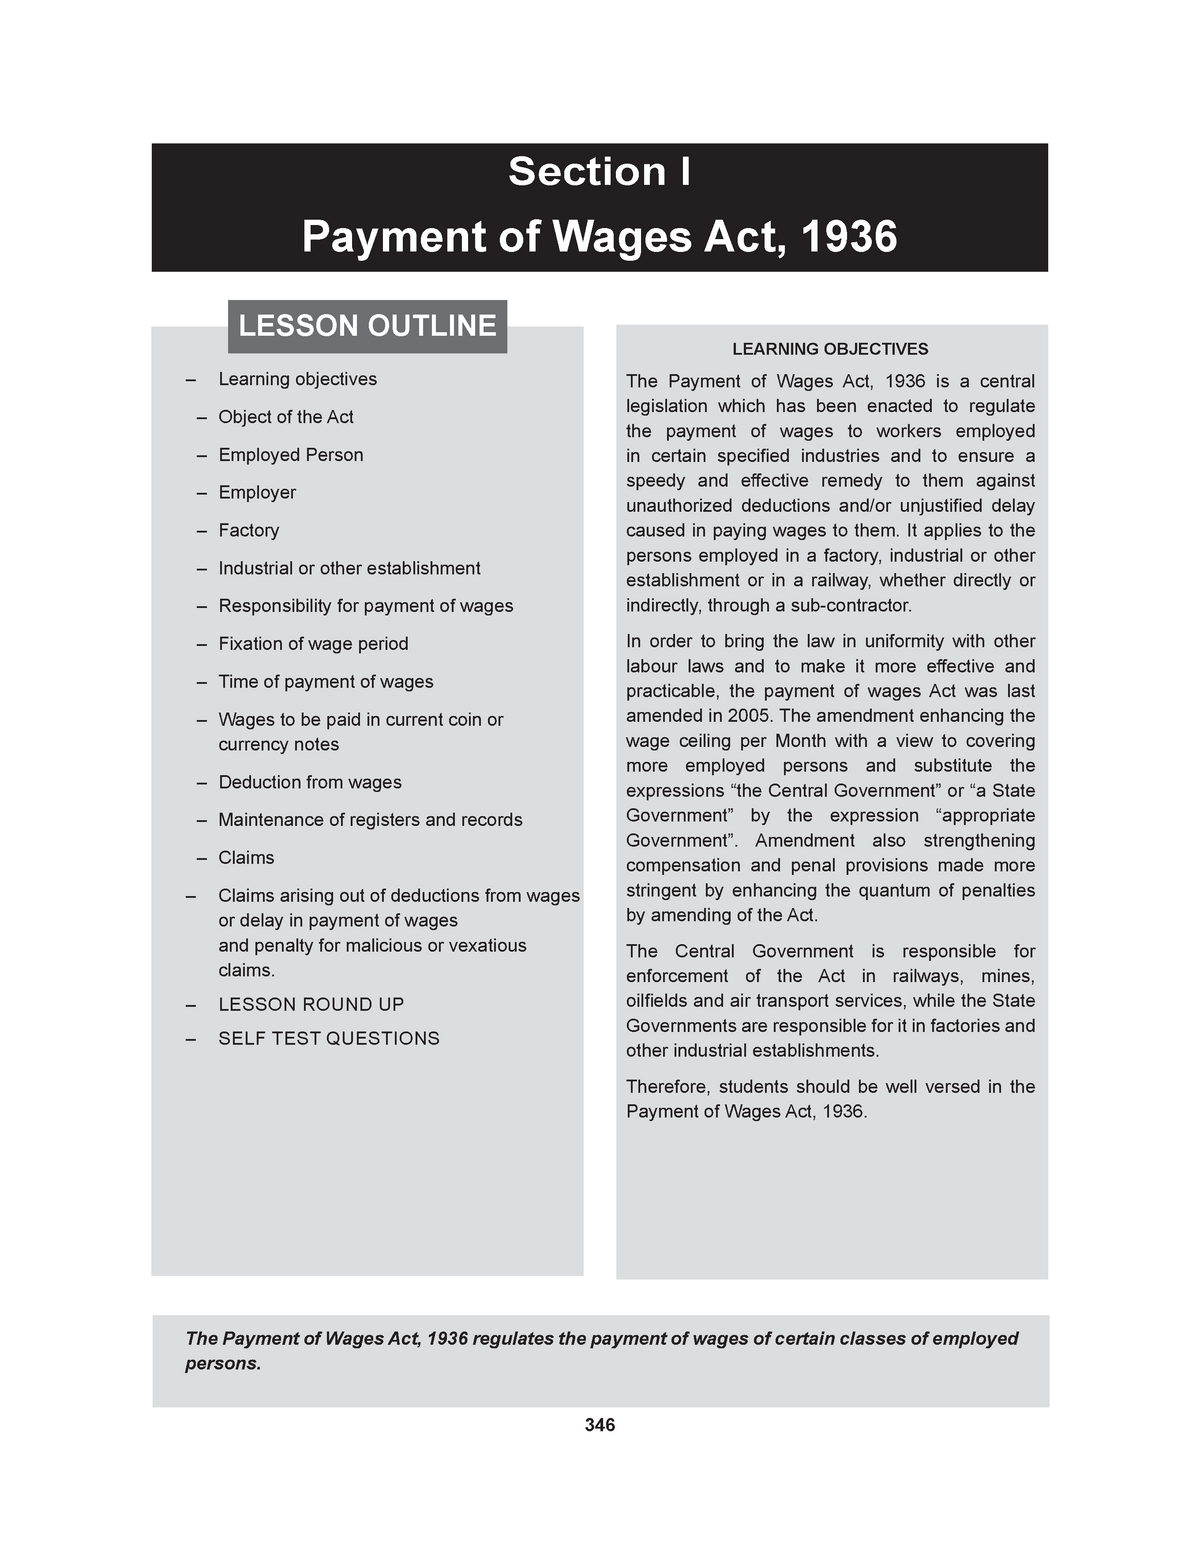 unauthorised deduction under payment of wages act 1936